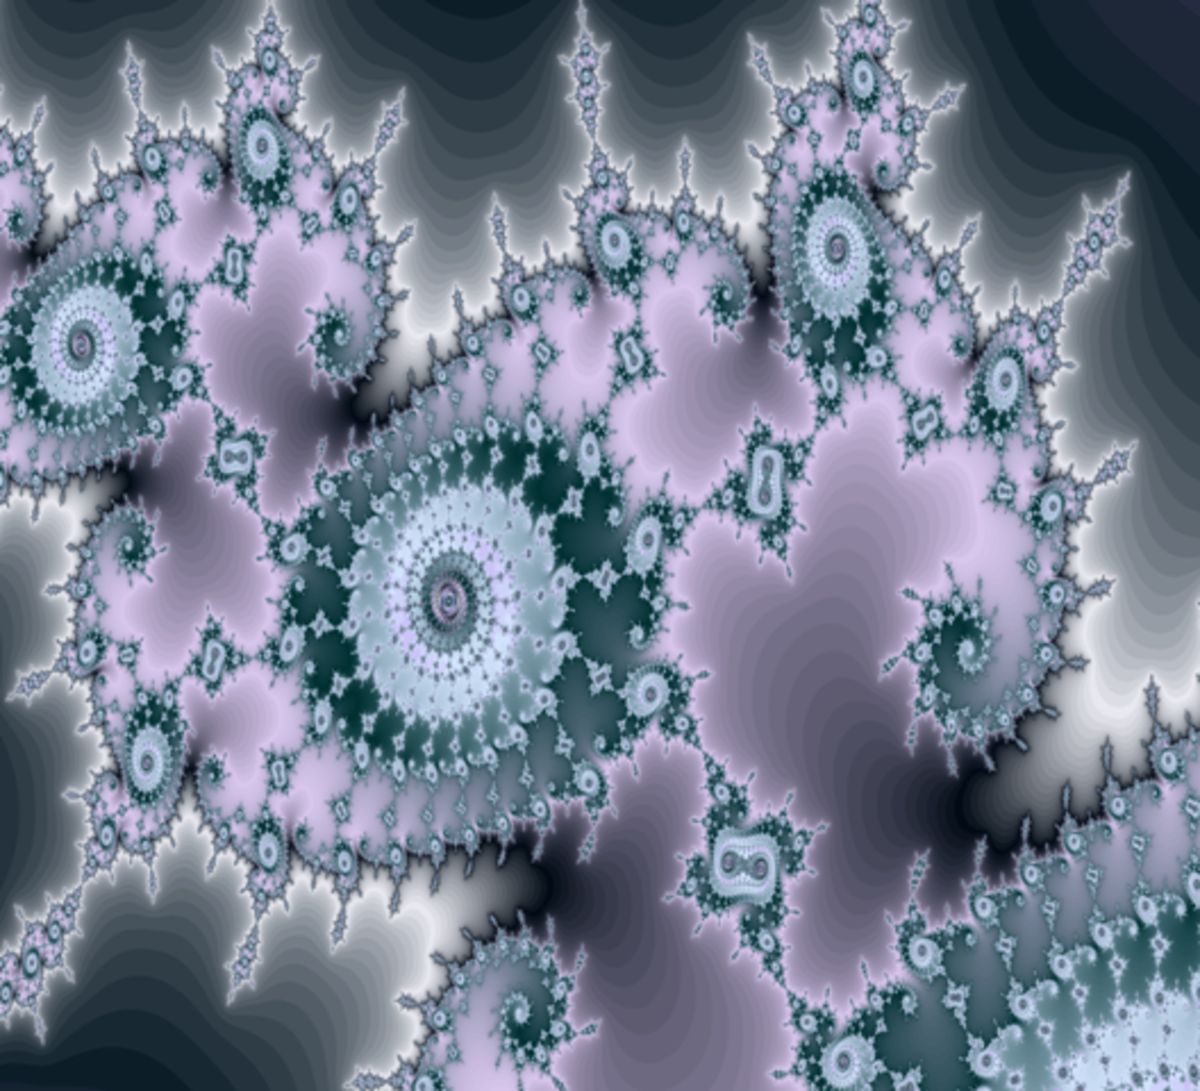 Fractal Imagery and My Digital Art